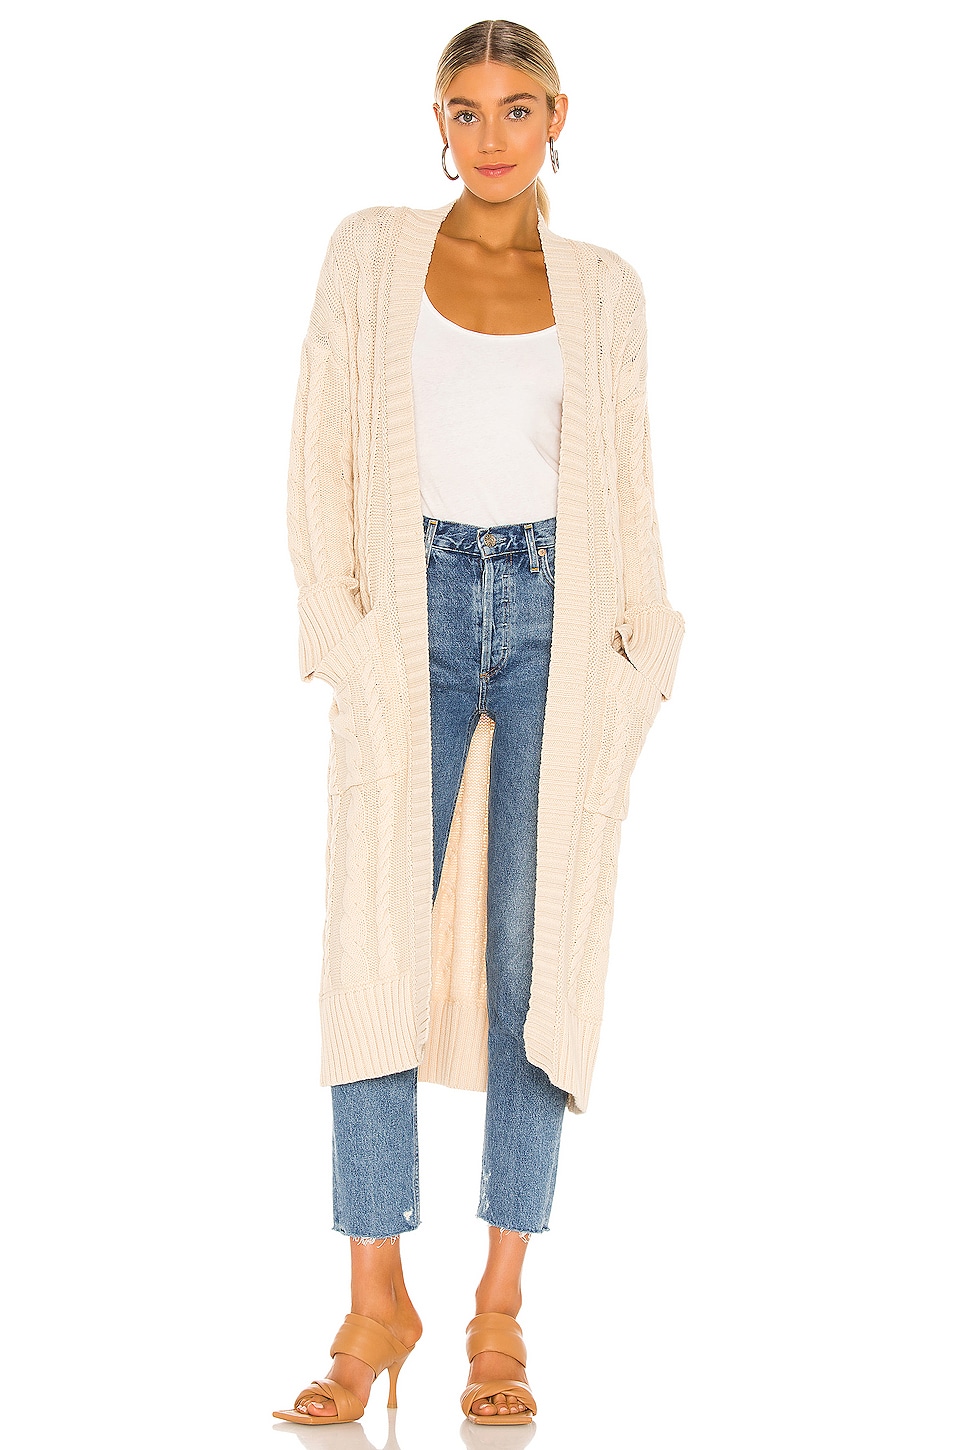 House of Harlow 1960 x REVOLVE Virgo Cable Knit Cardigan in Ivory | REVOLVE